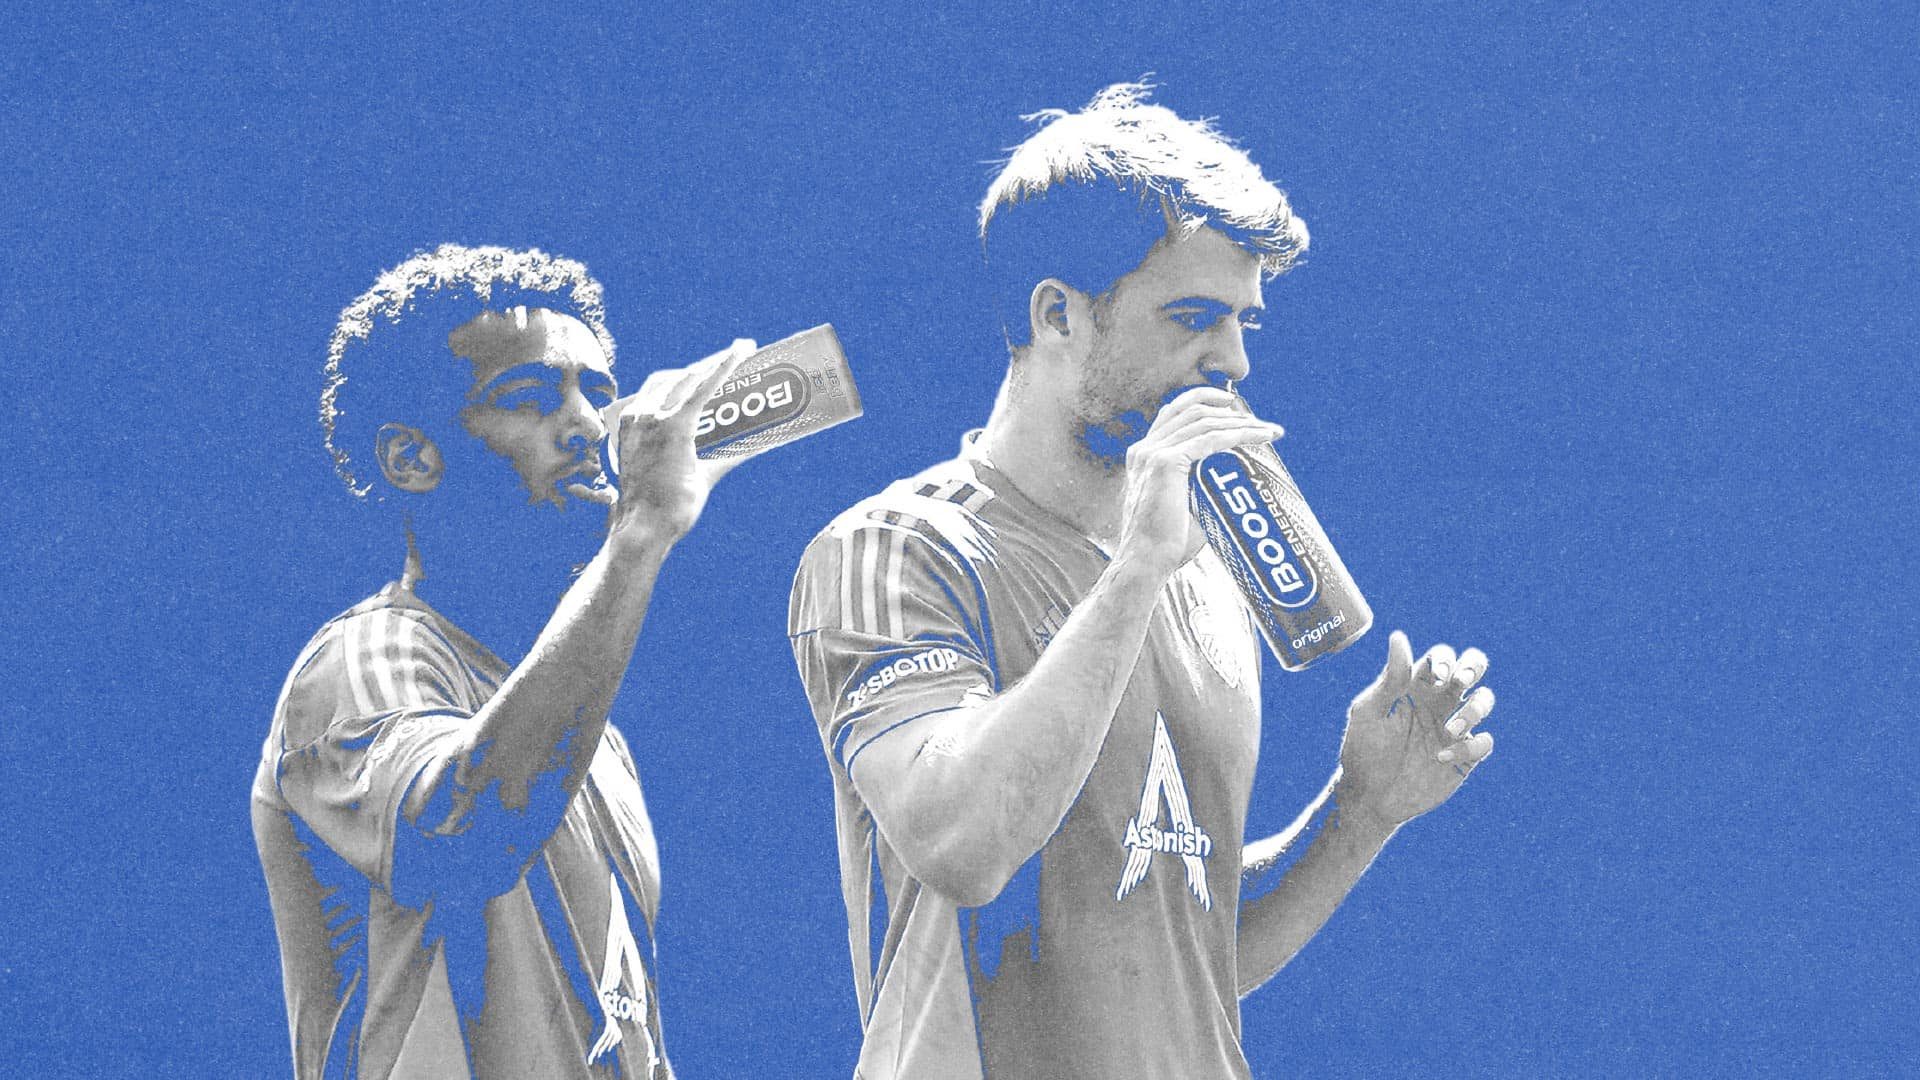 Tyler Adams and Patrick Bamford drinking bottles of Leeds United's favourite brand of highly caffeinated piss, Boost. At least it's not Red Bull